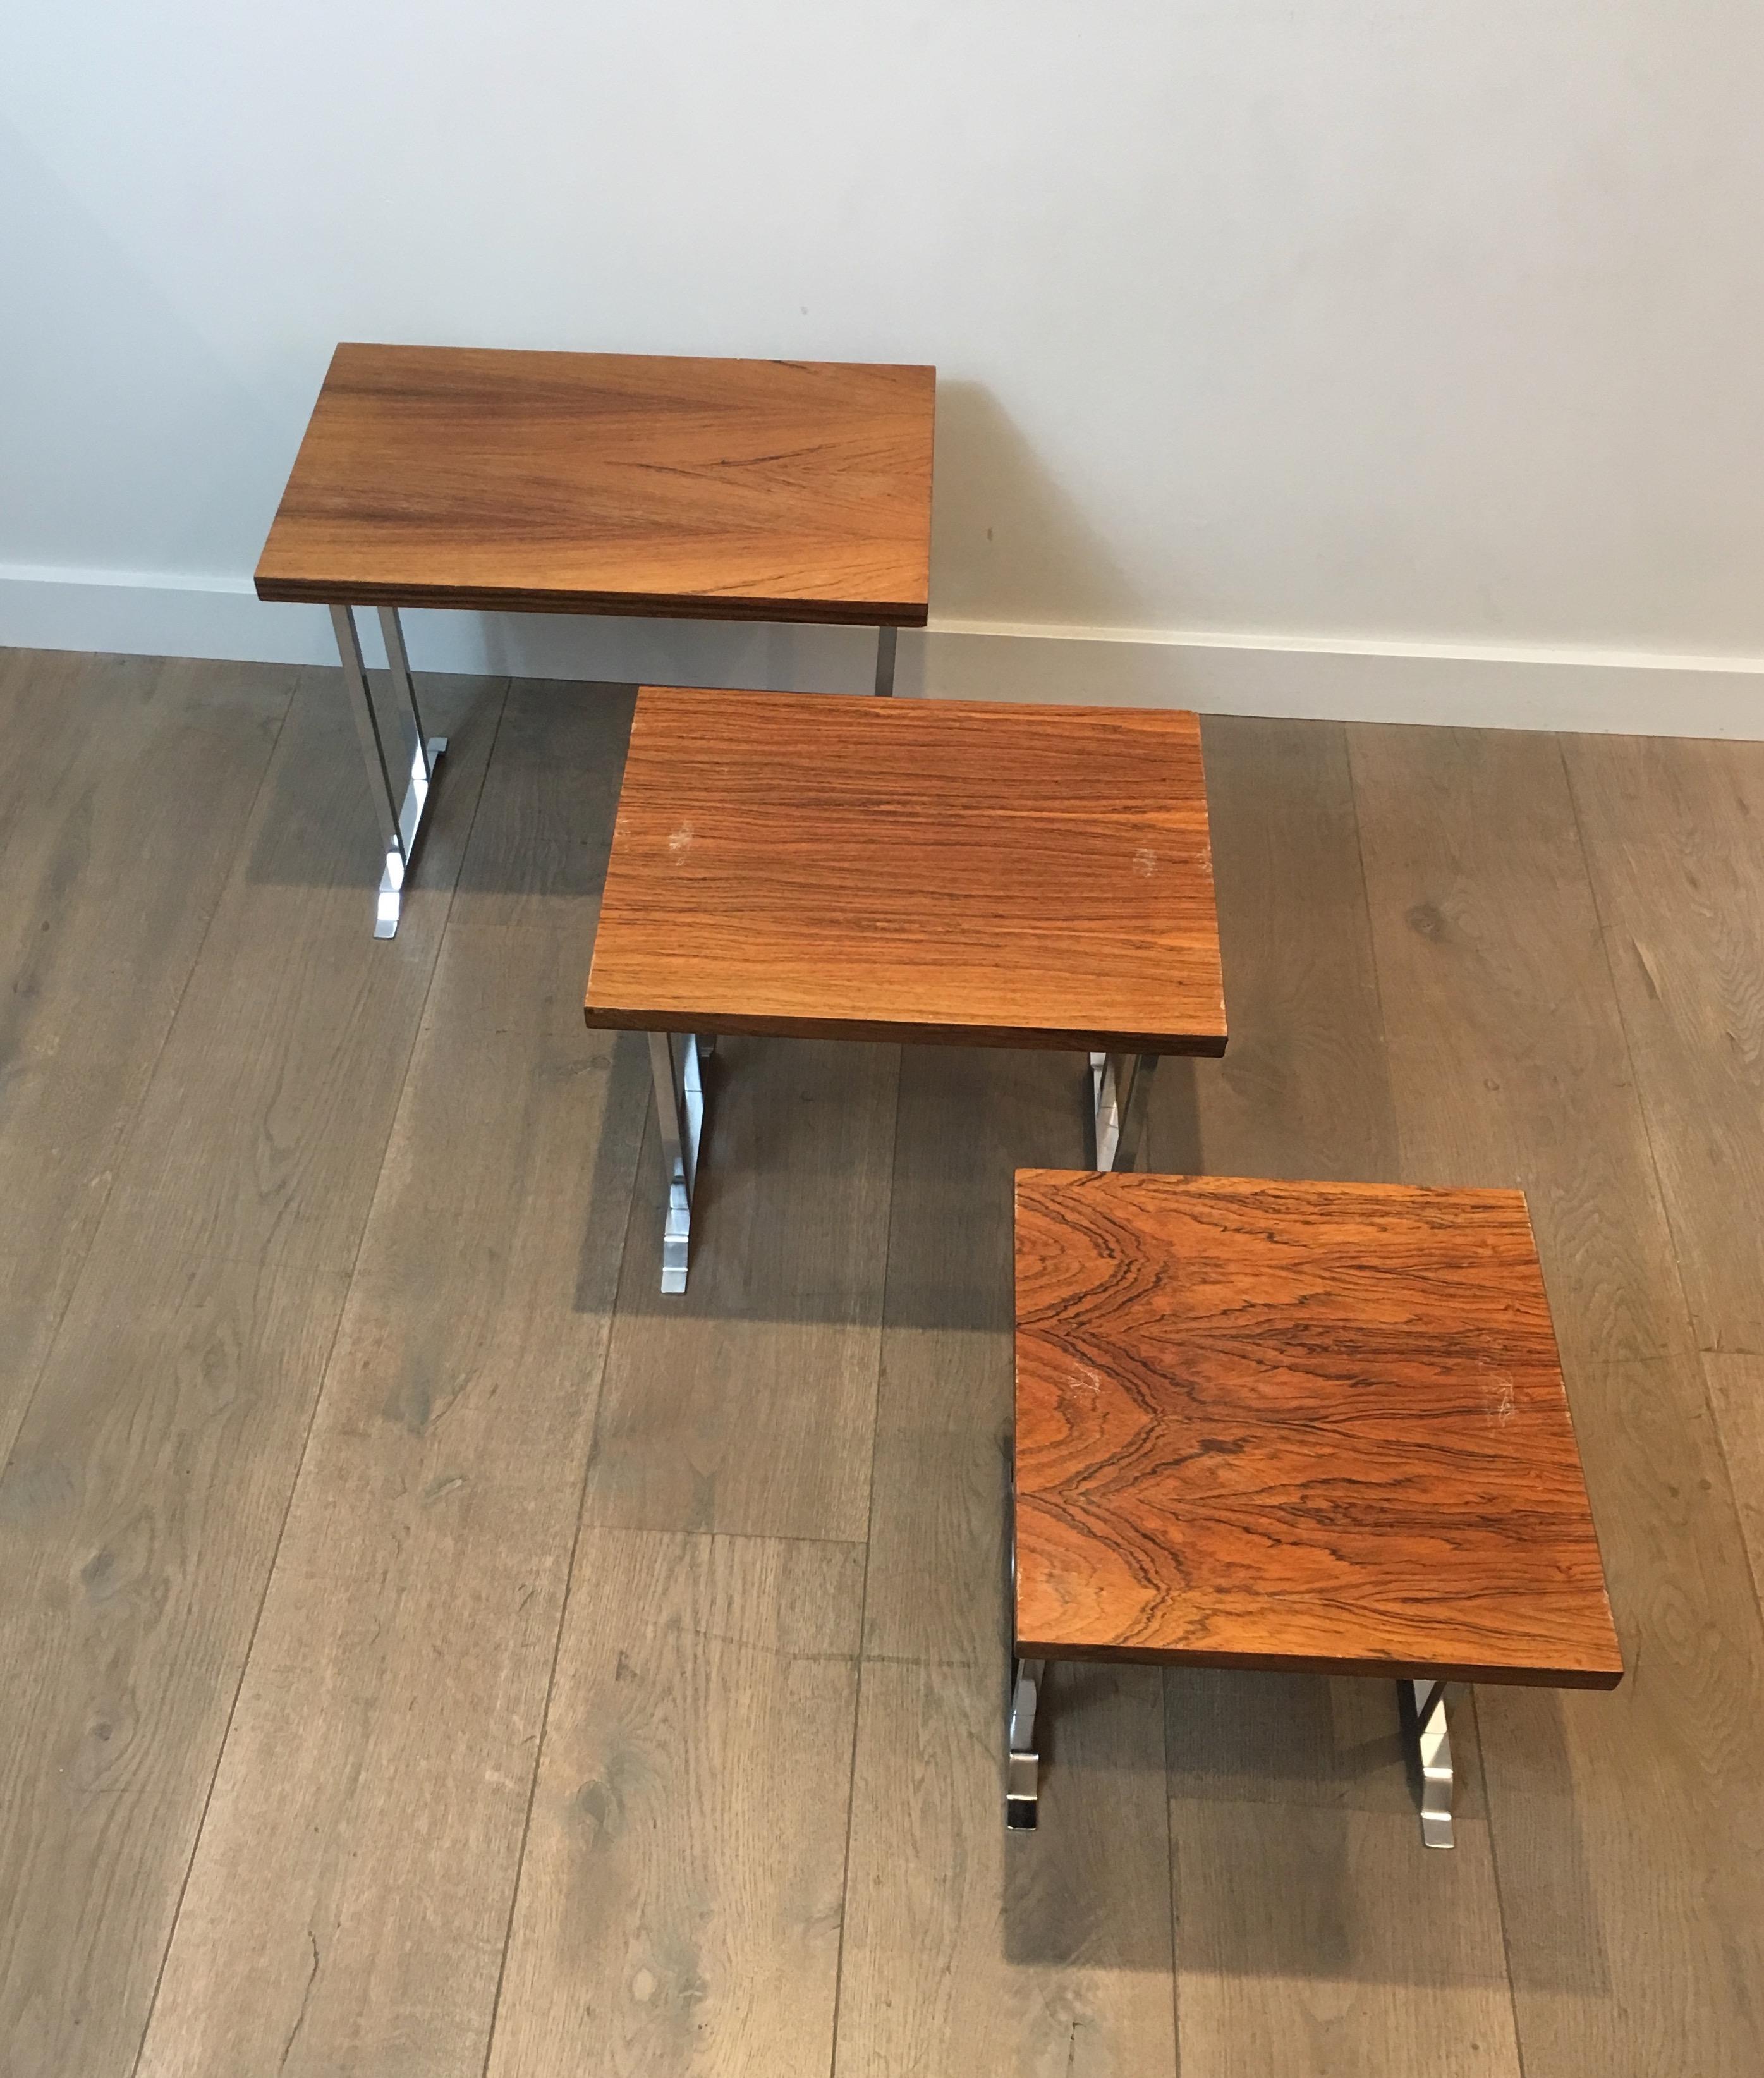 Set of 3 Exotic Wood and Chrome Nesting Tables, French, circa 1970 For Sale 11